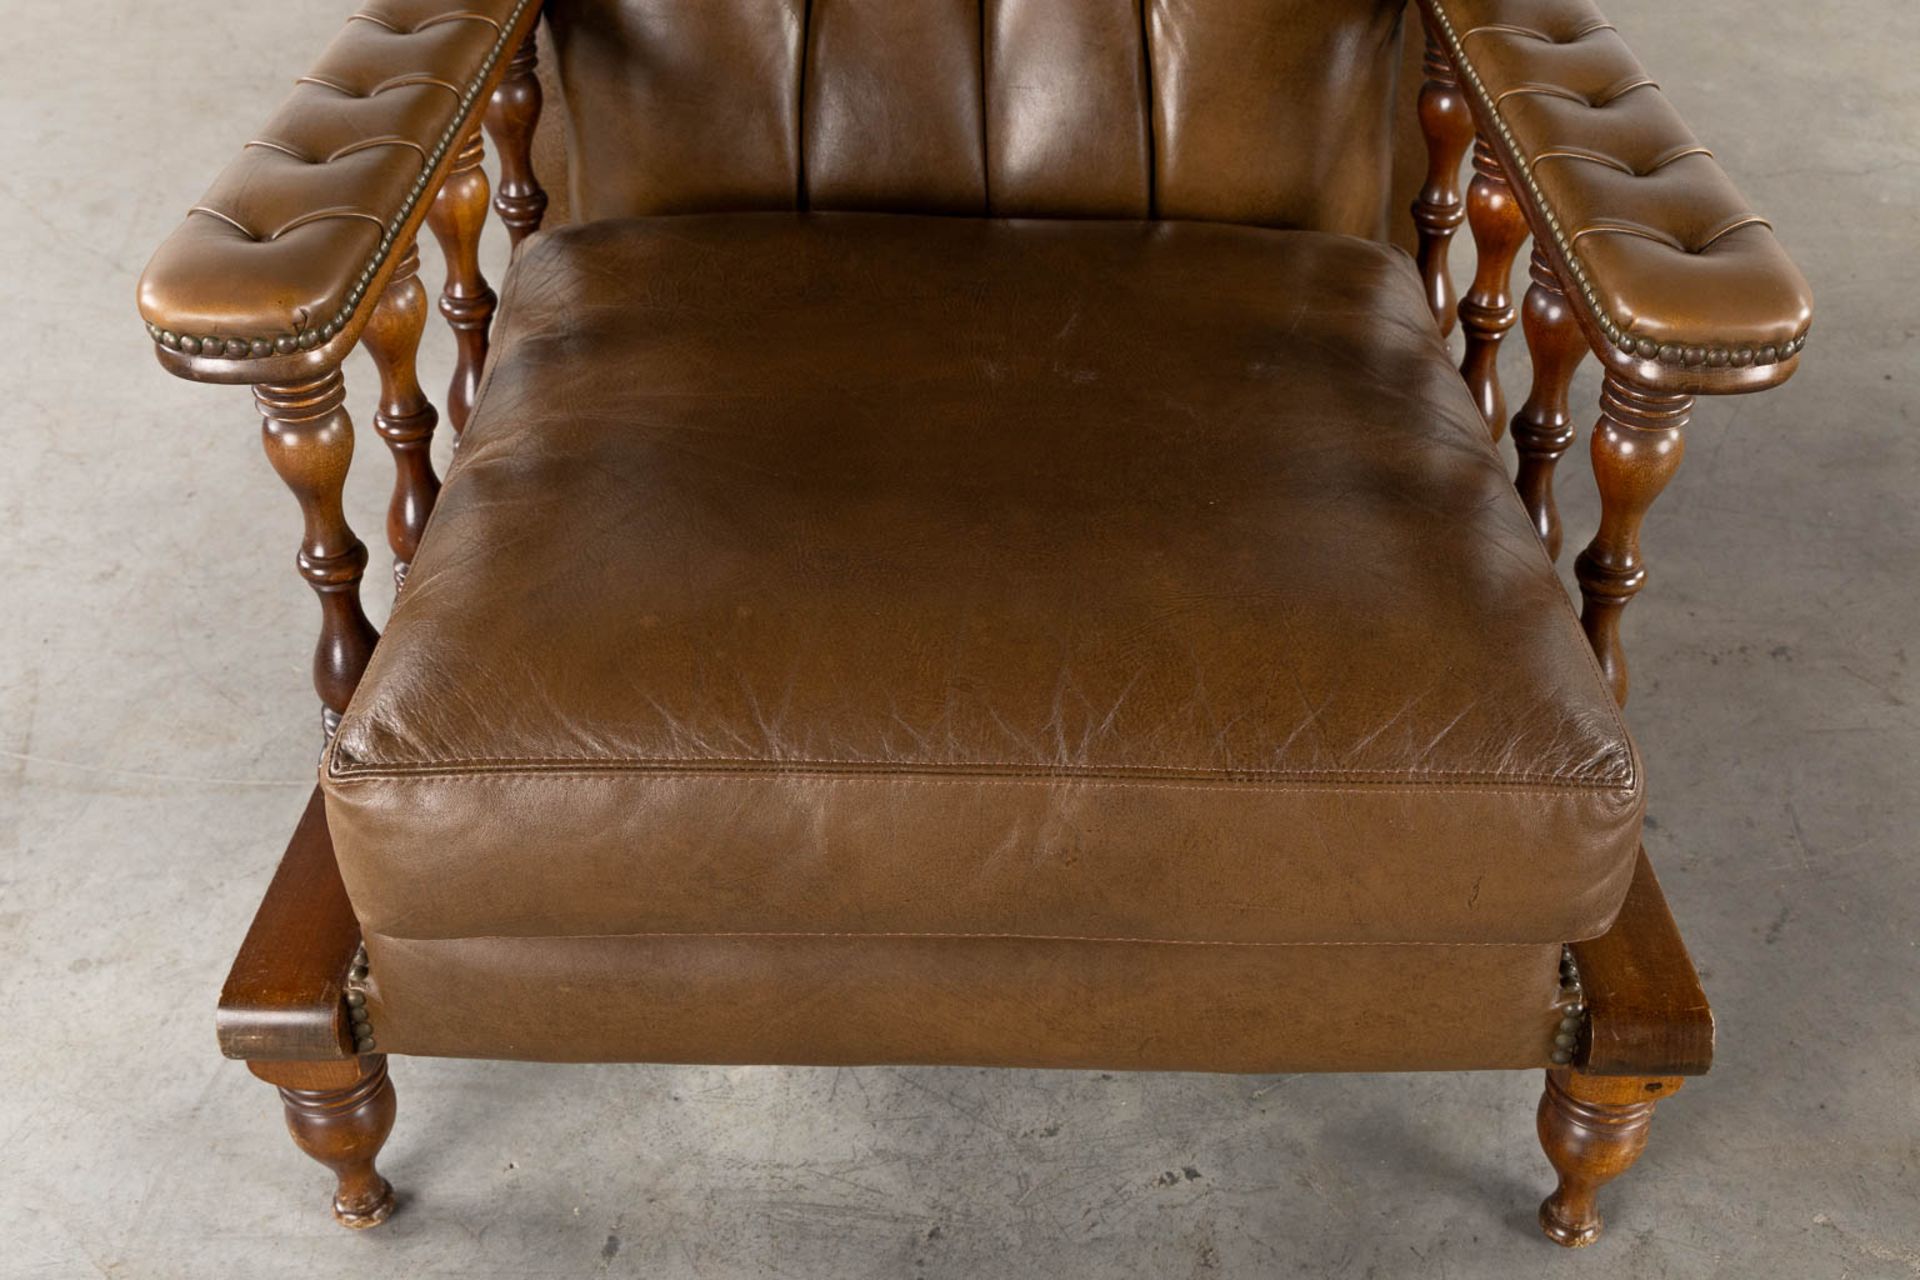 A pair of relax chairs, leather and wood in Chesterfield style. (L:83 x W:74 x H:95 cm) - Bild 10 aus 11